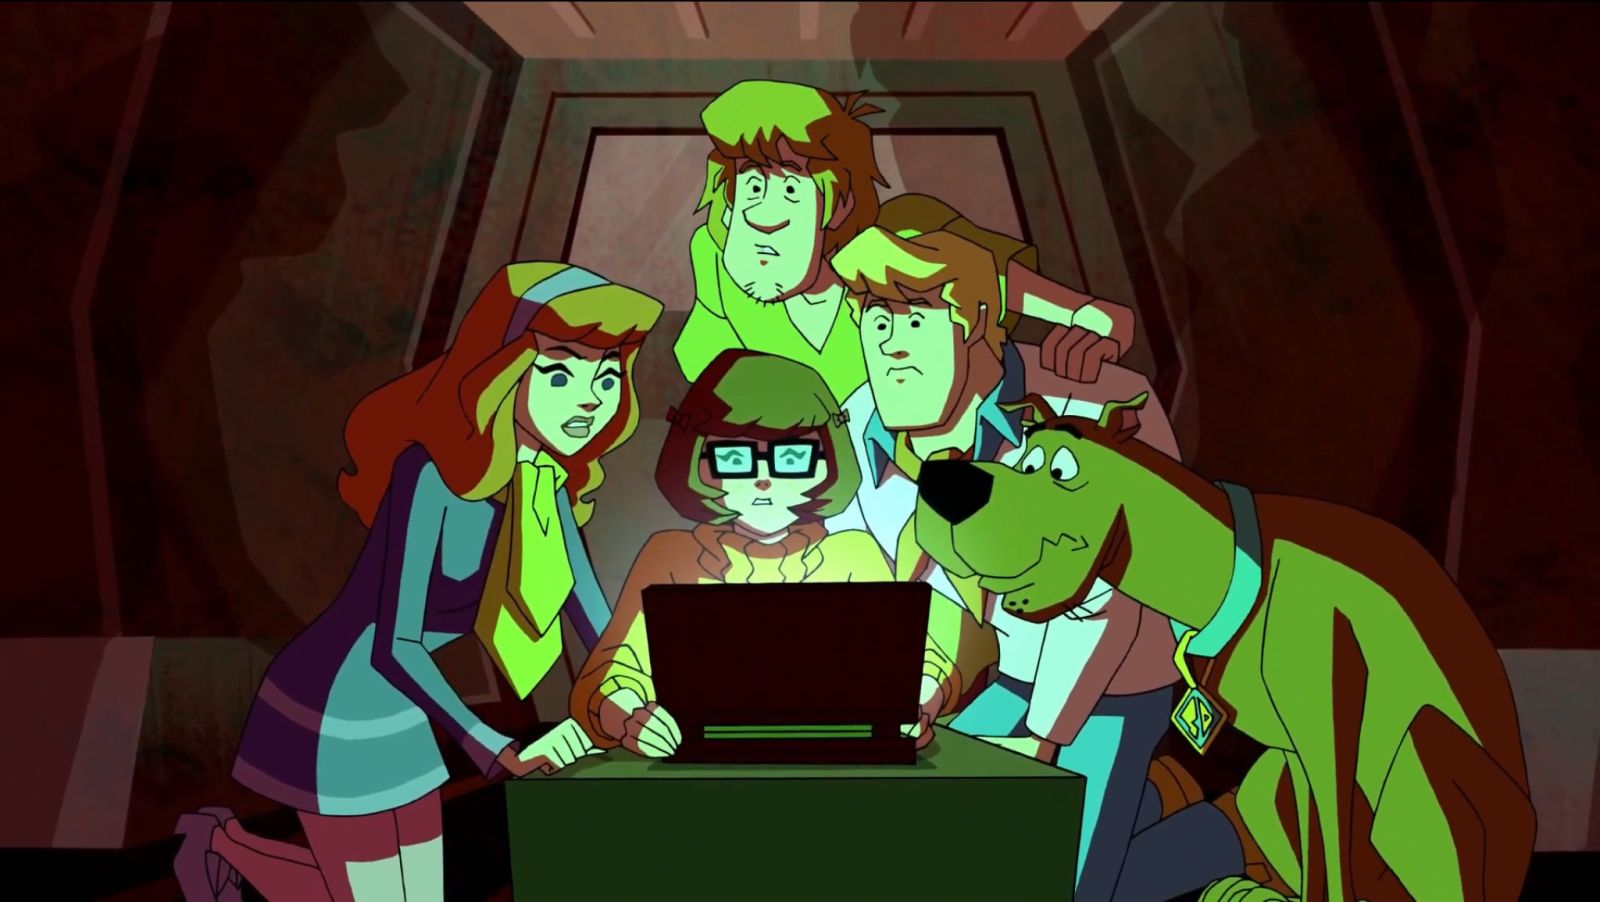 Scooby-doo! mystery incorporated (phần 2) - Scooby-doo! mystery incorporated (season 2)